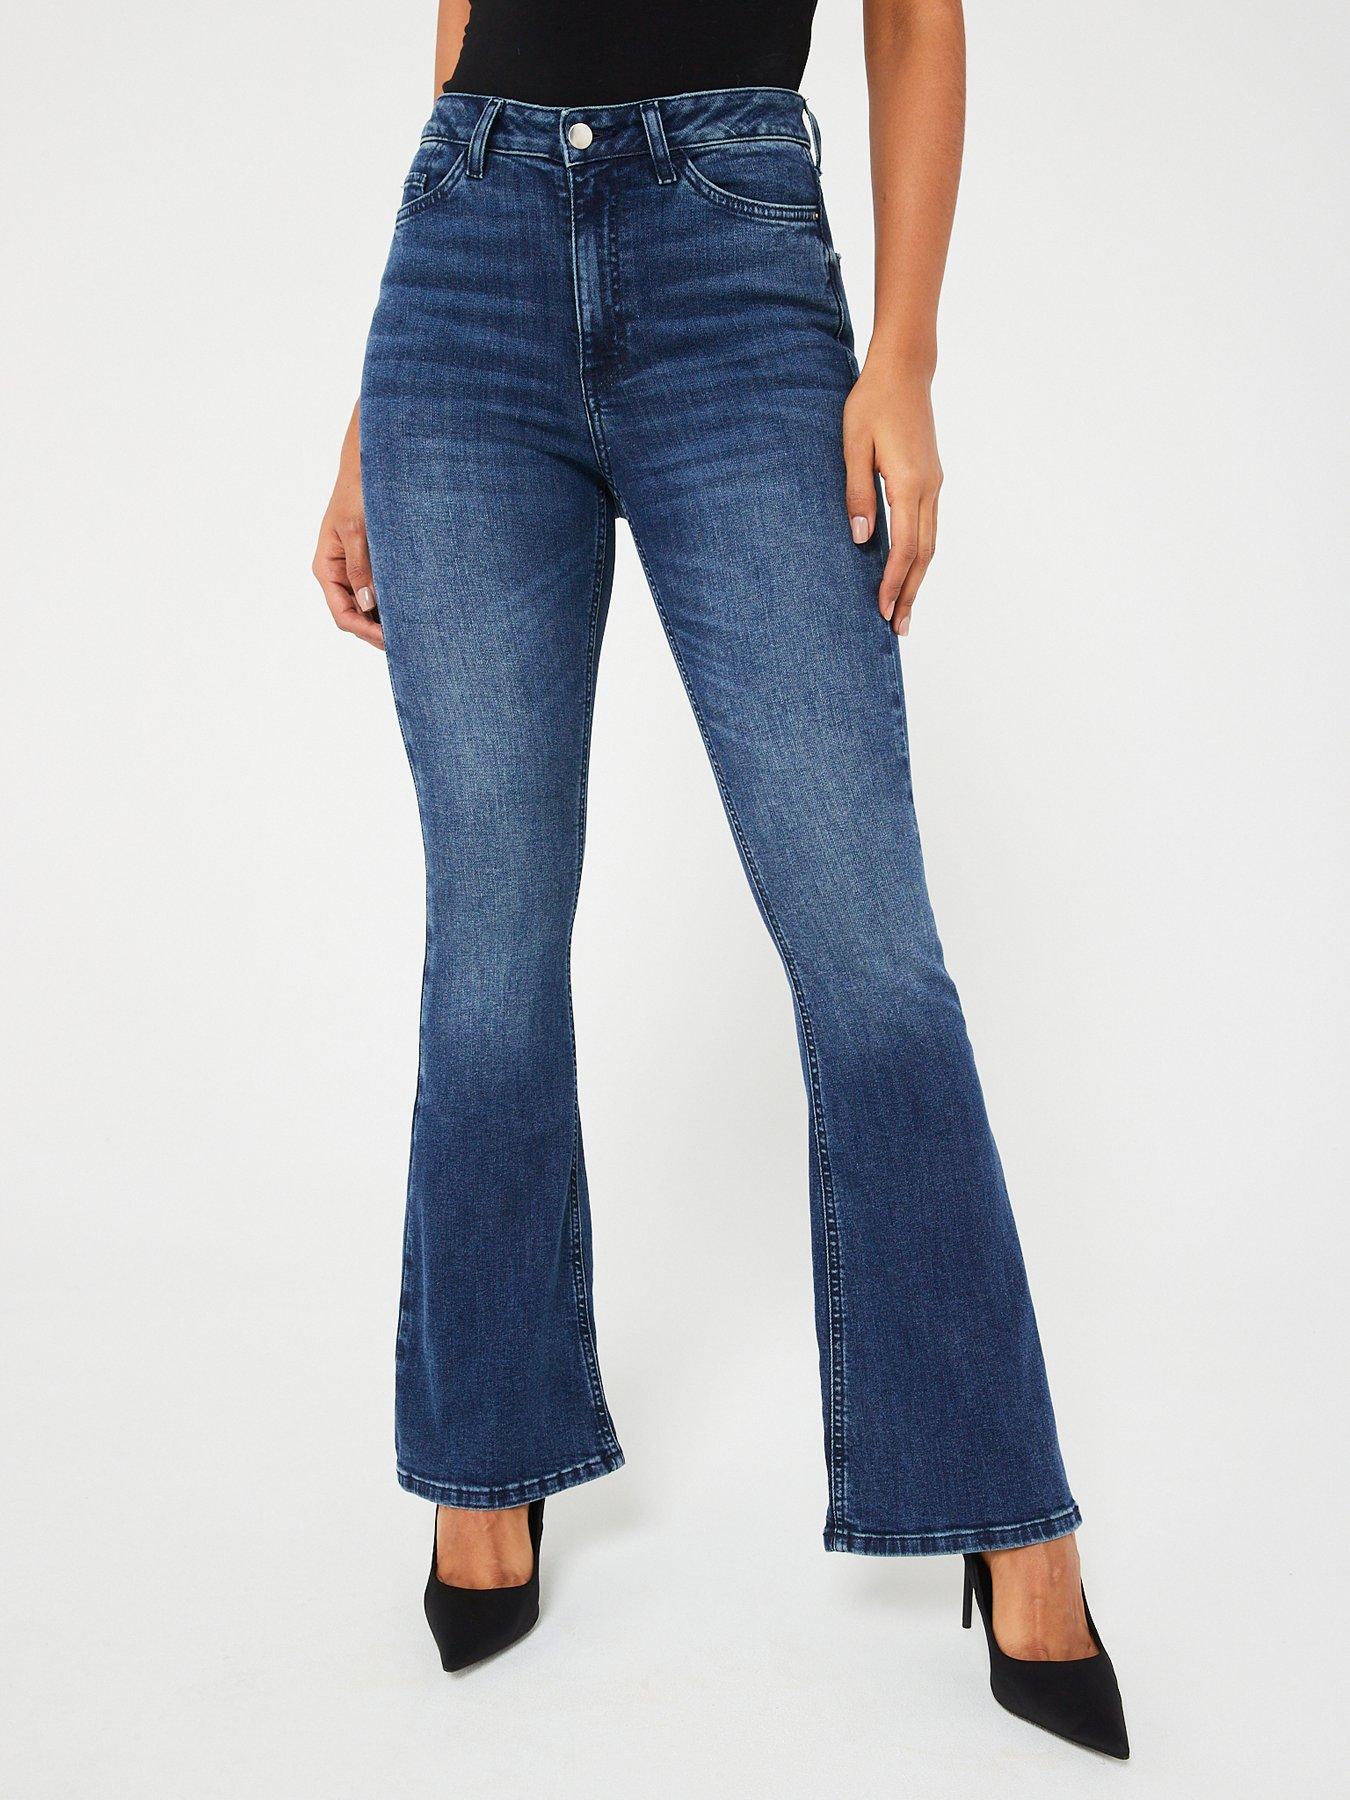 Flared Jeans For Women, Shop Flared Jeans